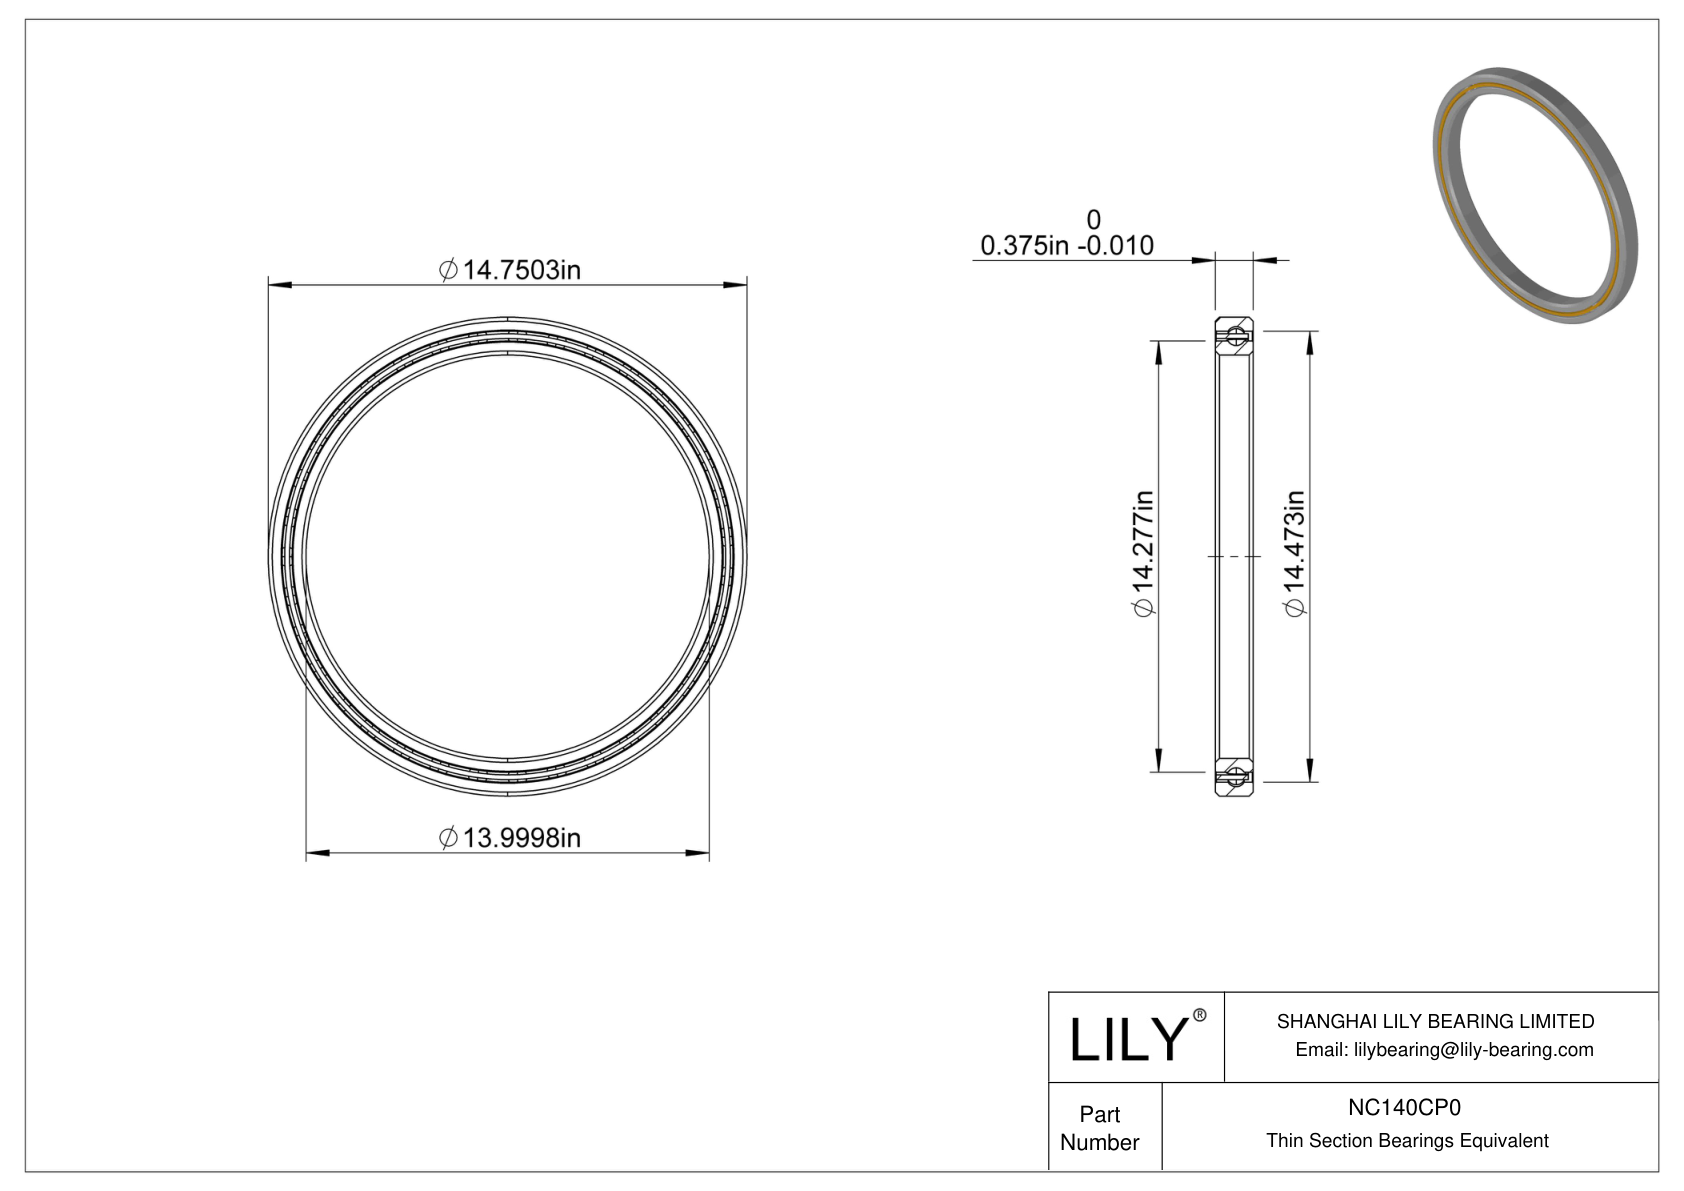 NC140CP0 Constant Section (CS) Bearings cad drawing